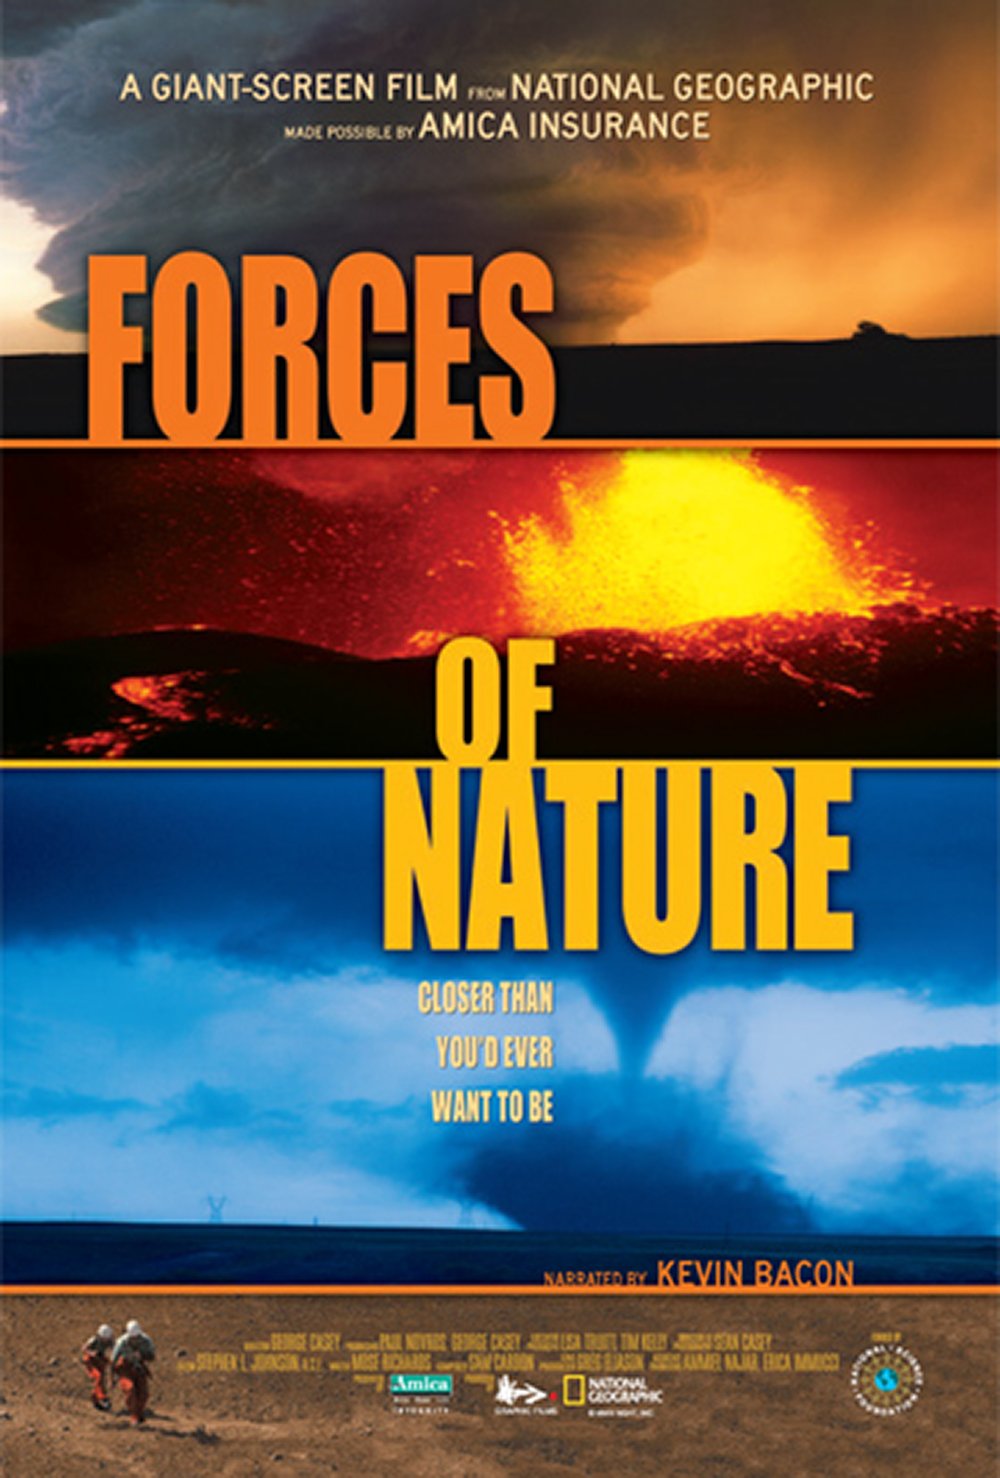 Poster of the movie Forces of Nature